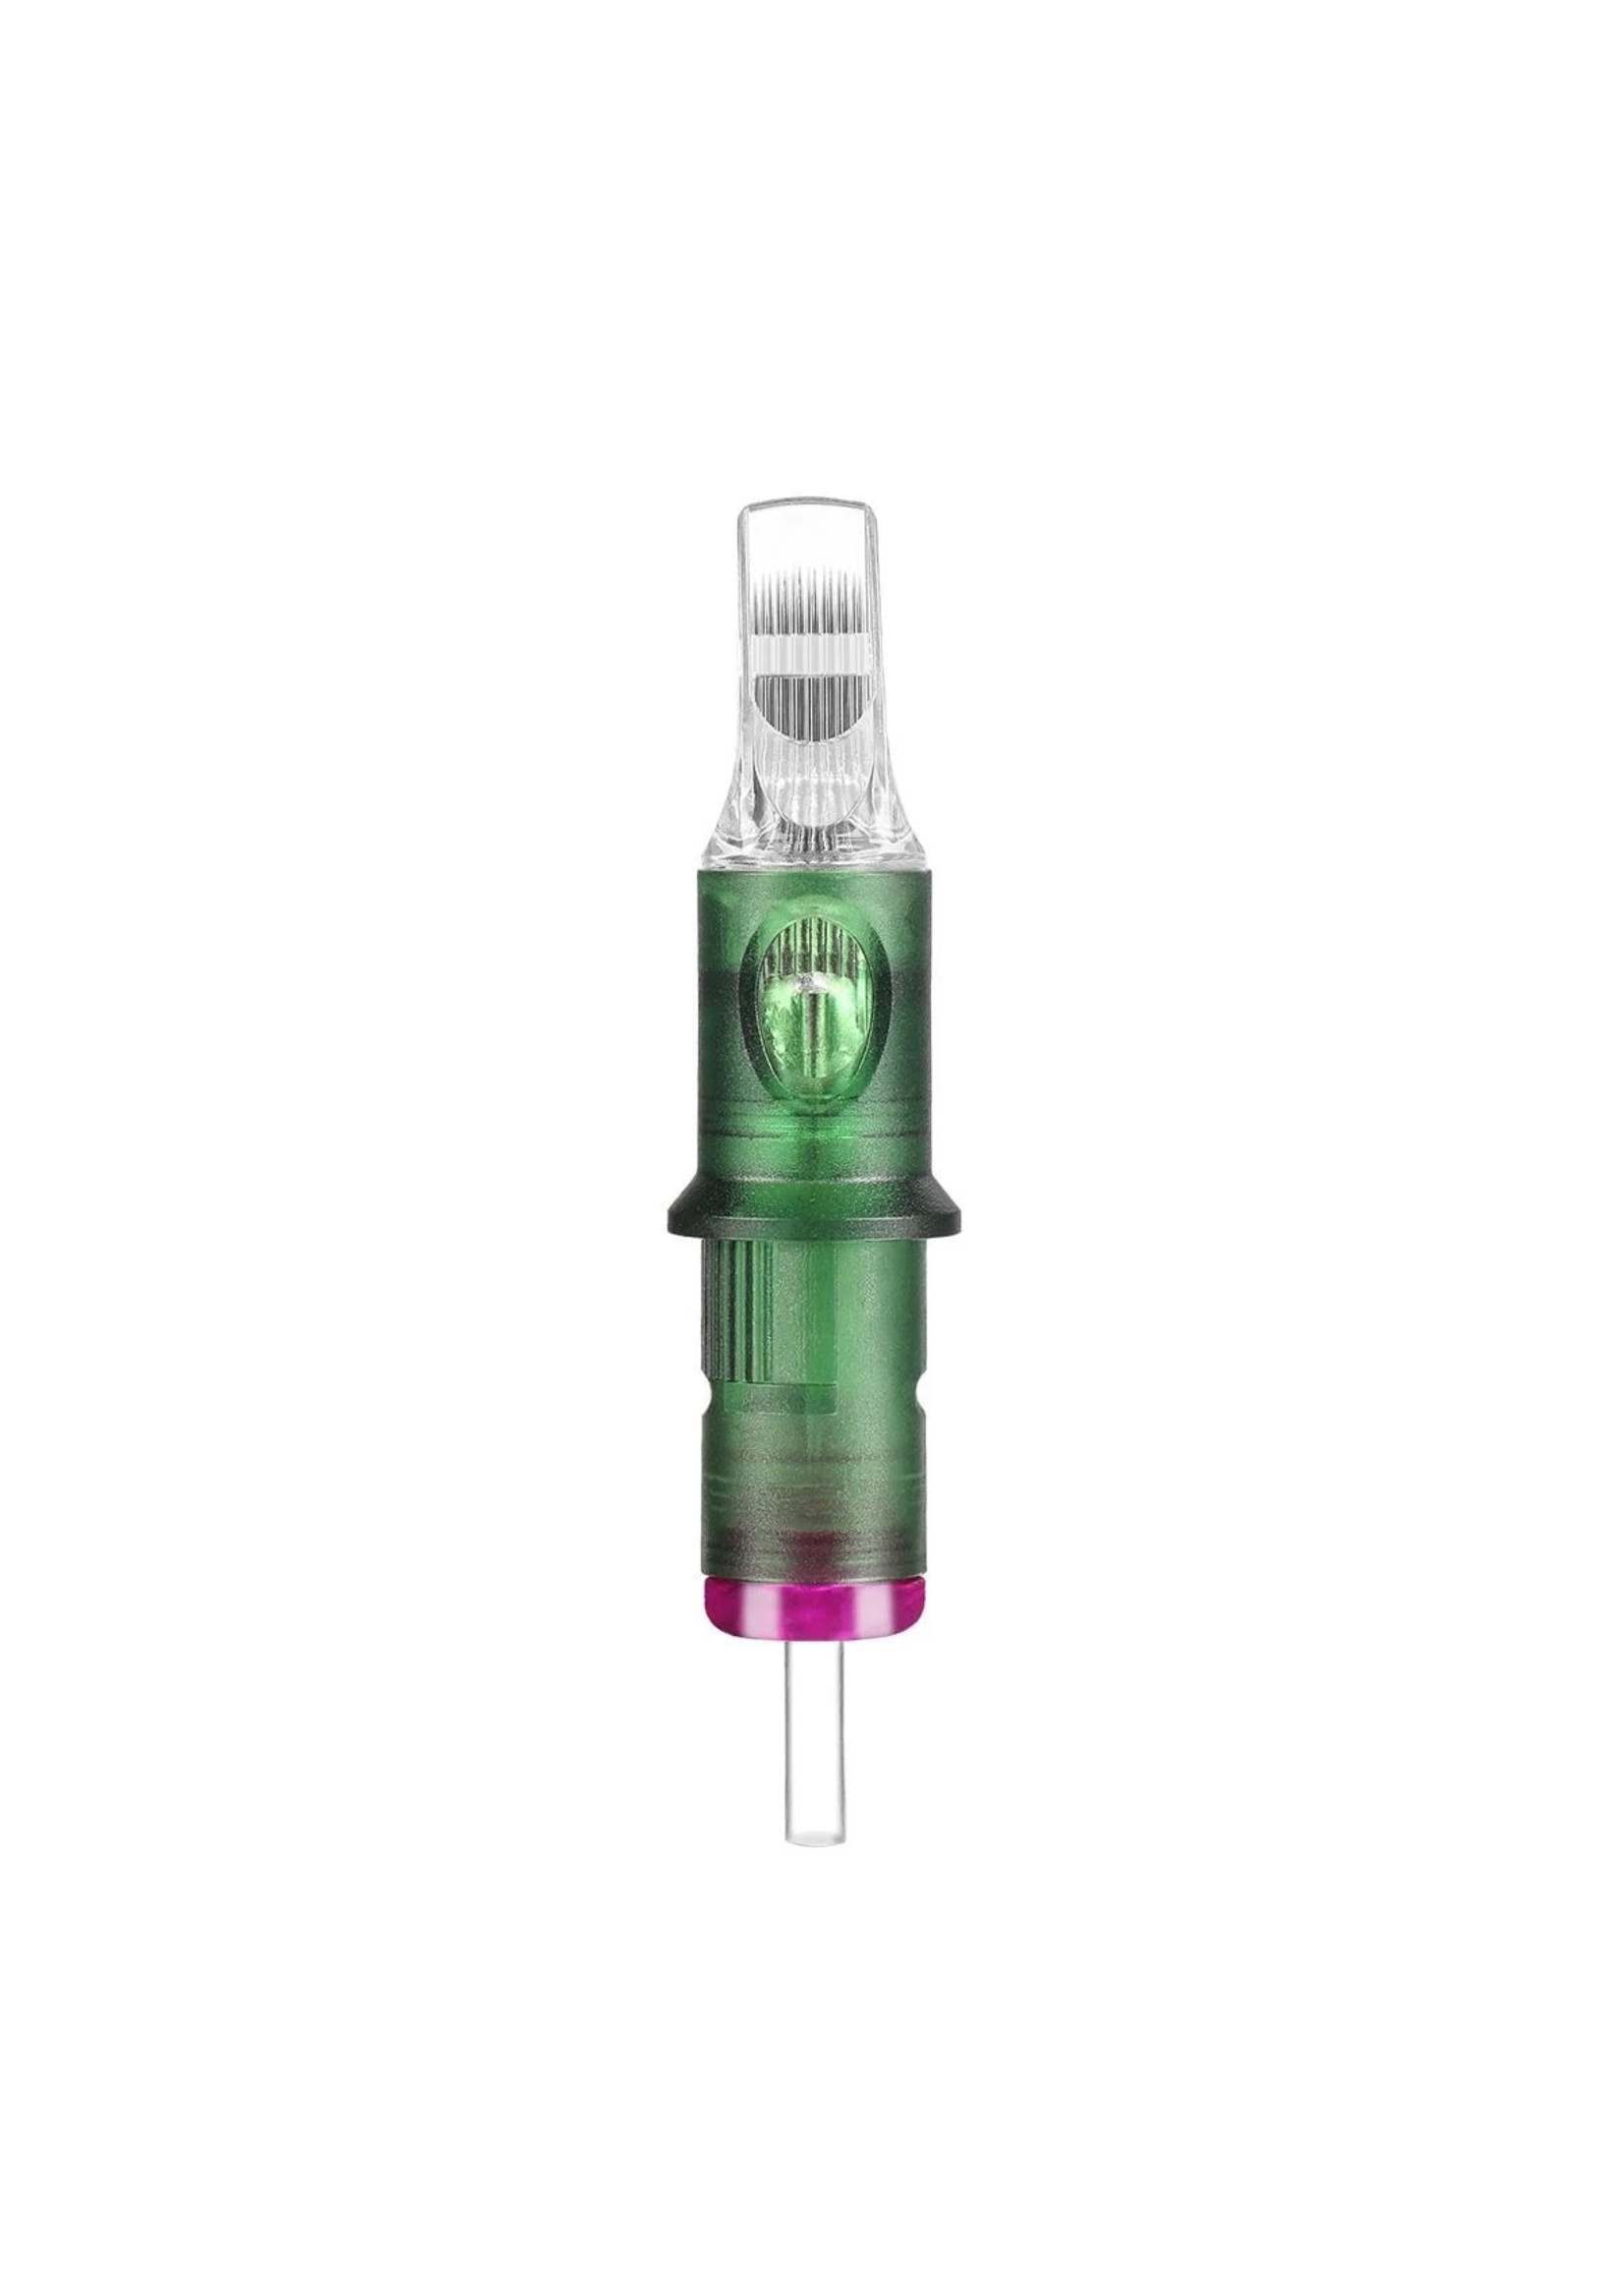 Artistic Tattoo Supply Inc. Artistic Tattoo Supply - ATS Green - Needle Cartridge - DC1223CMM - Great for Color - Closed - 0.35mm - Curved Magnum- Medium Taper - Box of 20pcs